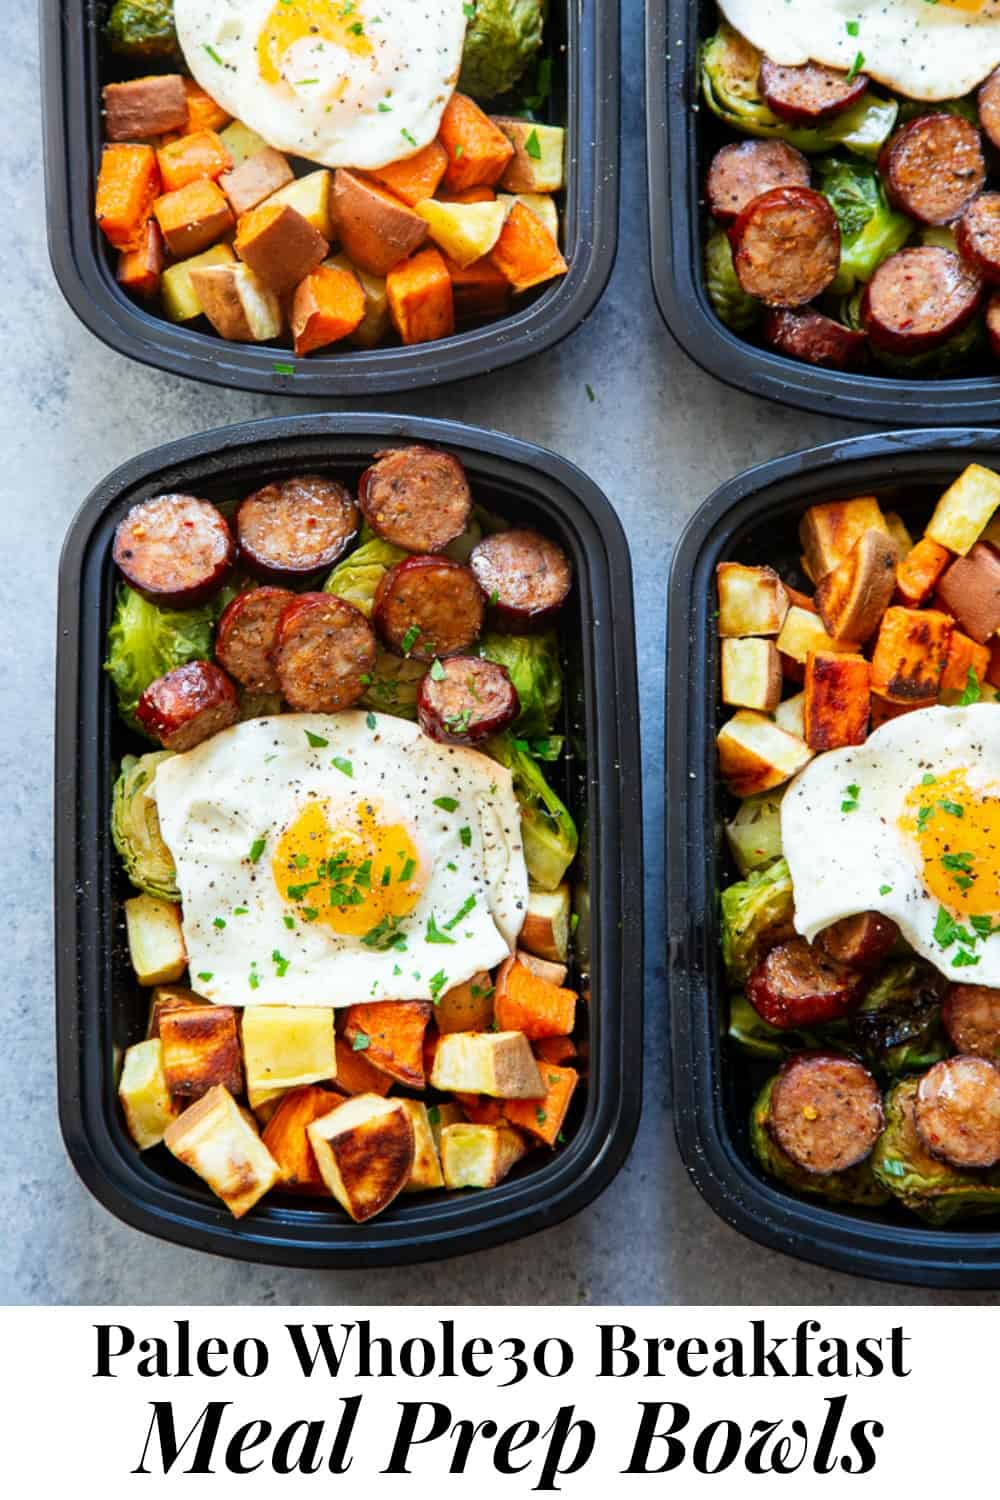 Paleo Breakfast Meal Prep Bowls Whole30 The Paleo Running Momma 2650